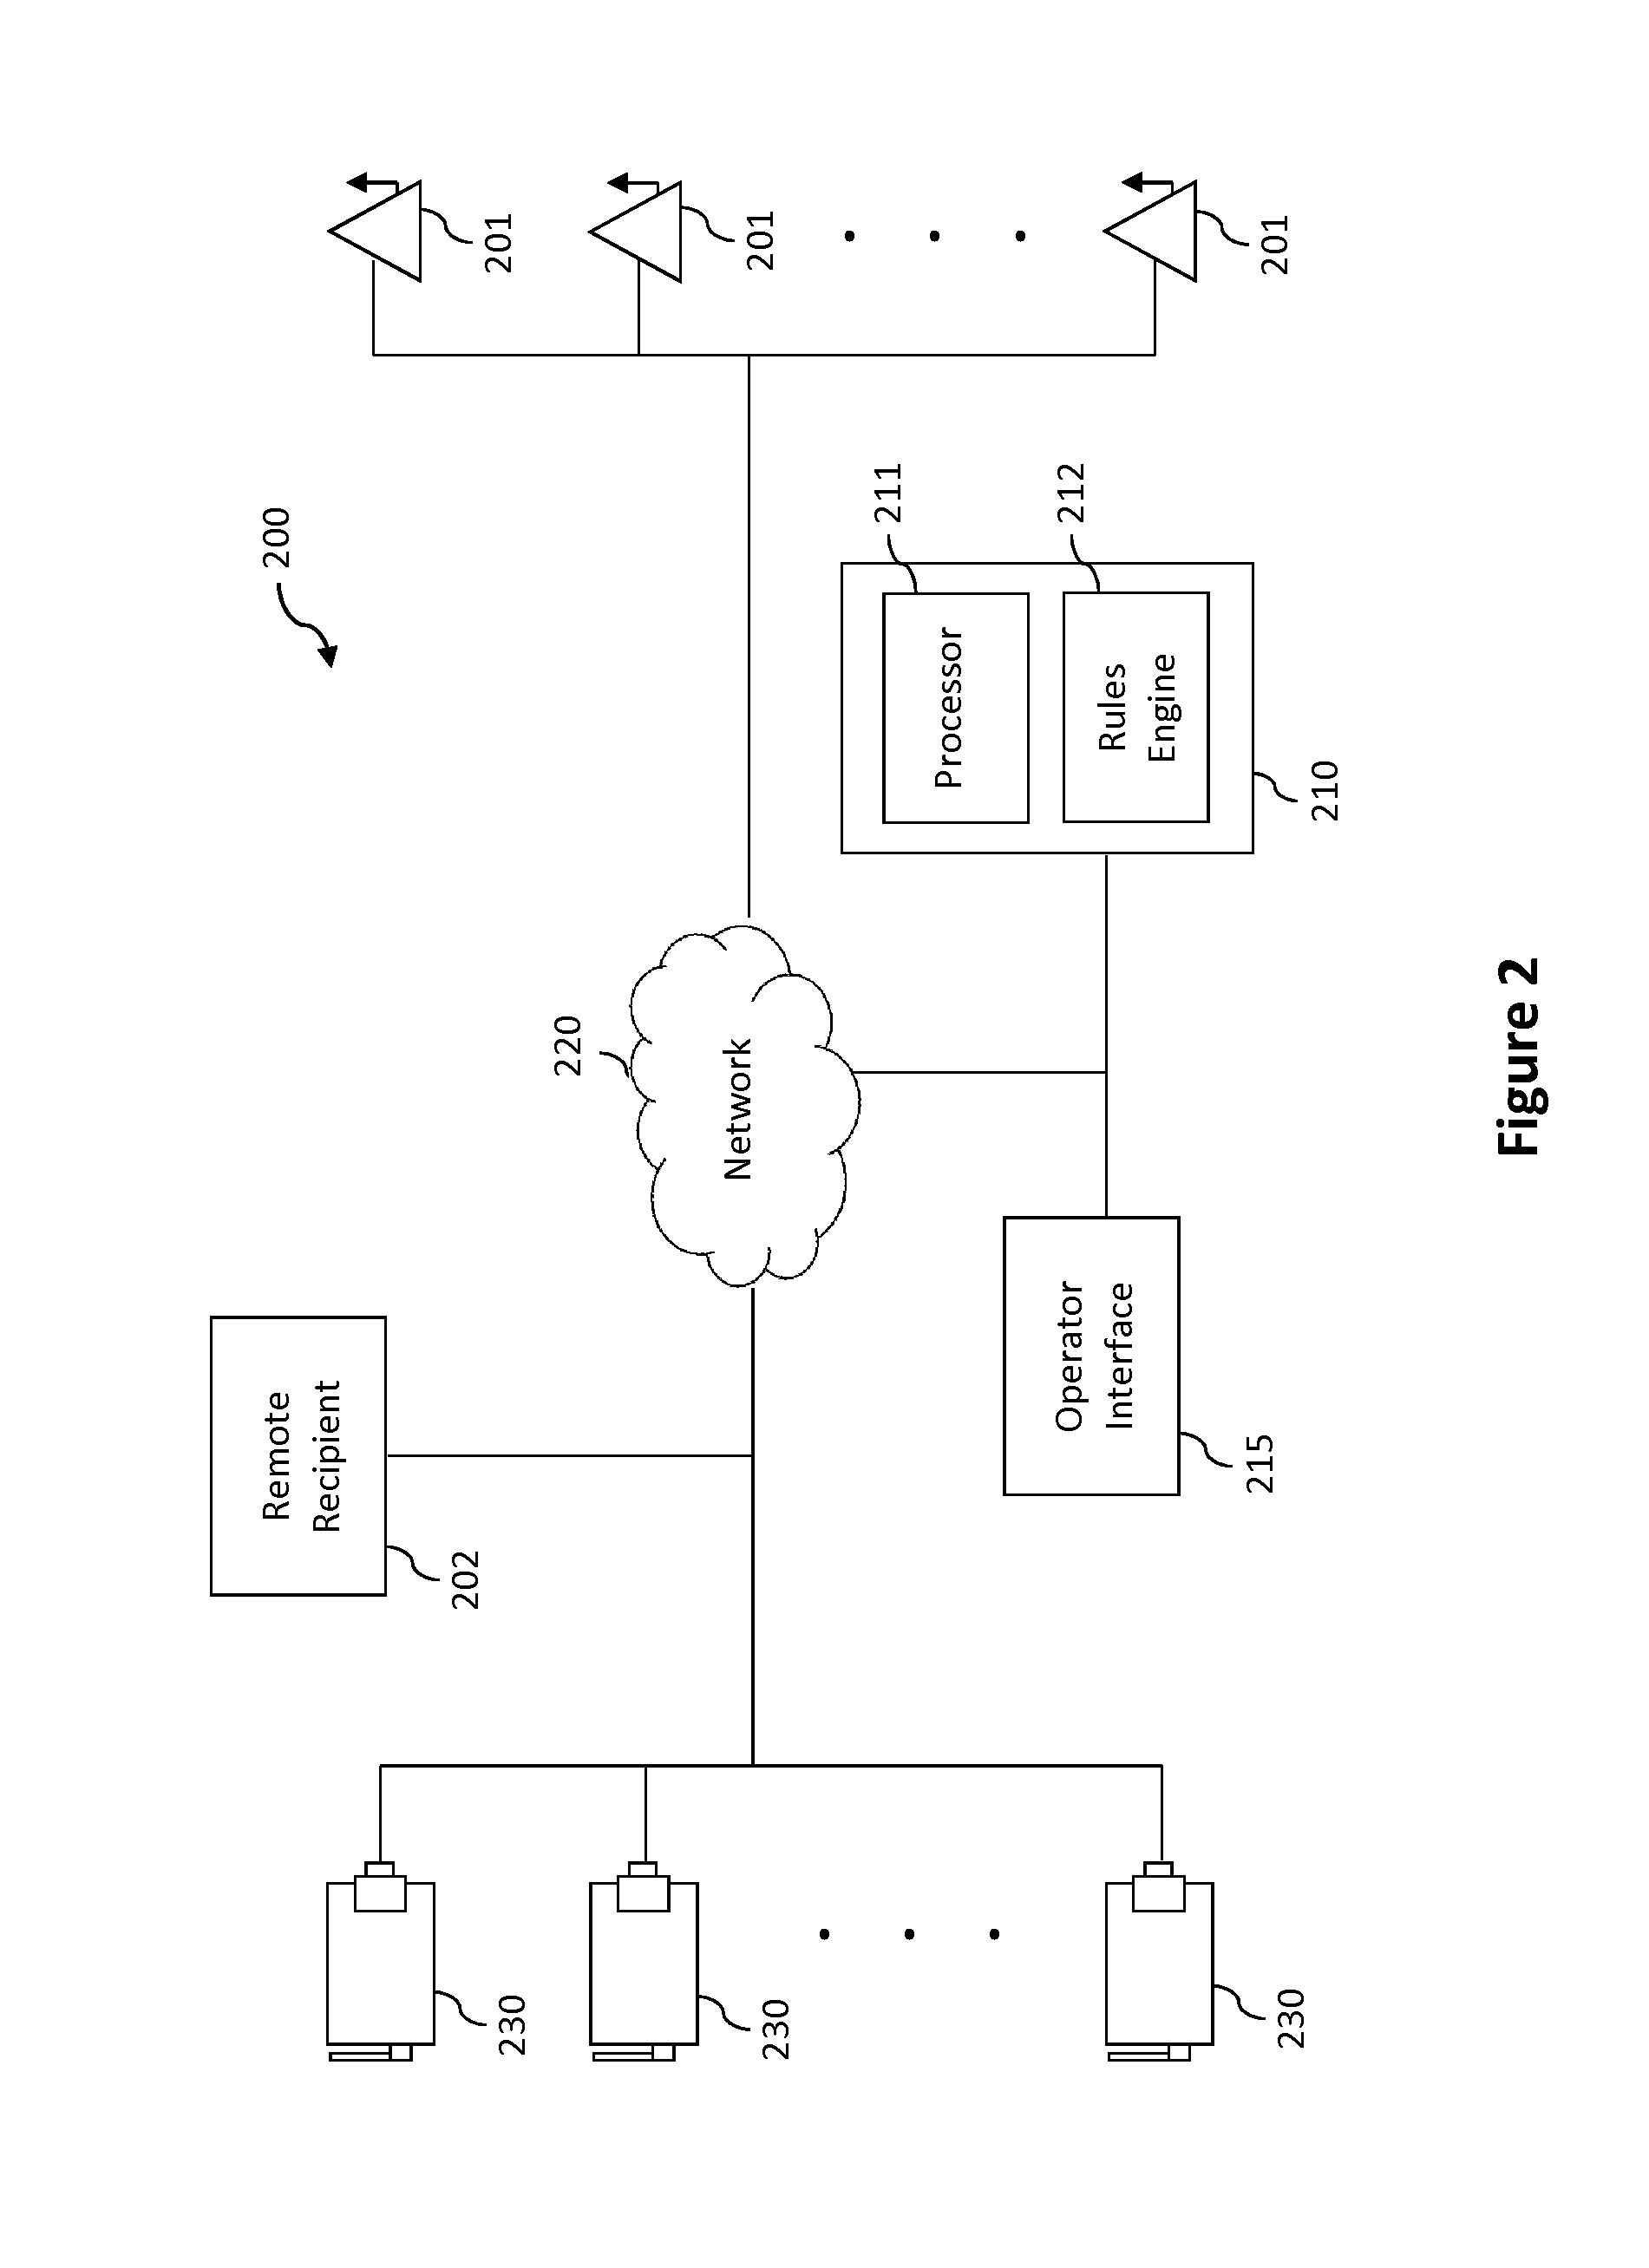 Camera assembly, system, and method for intelligent video capture and streaming